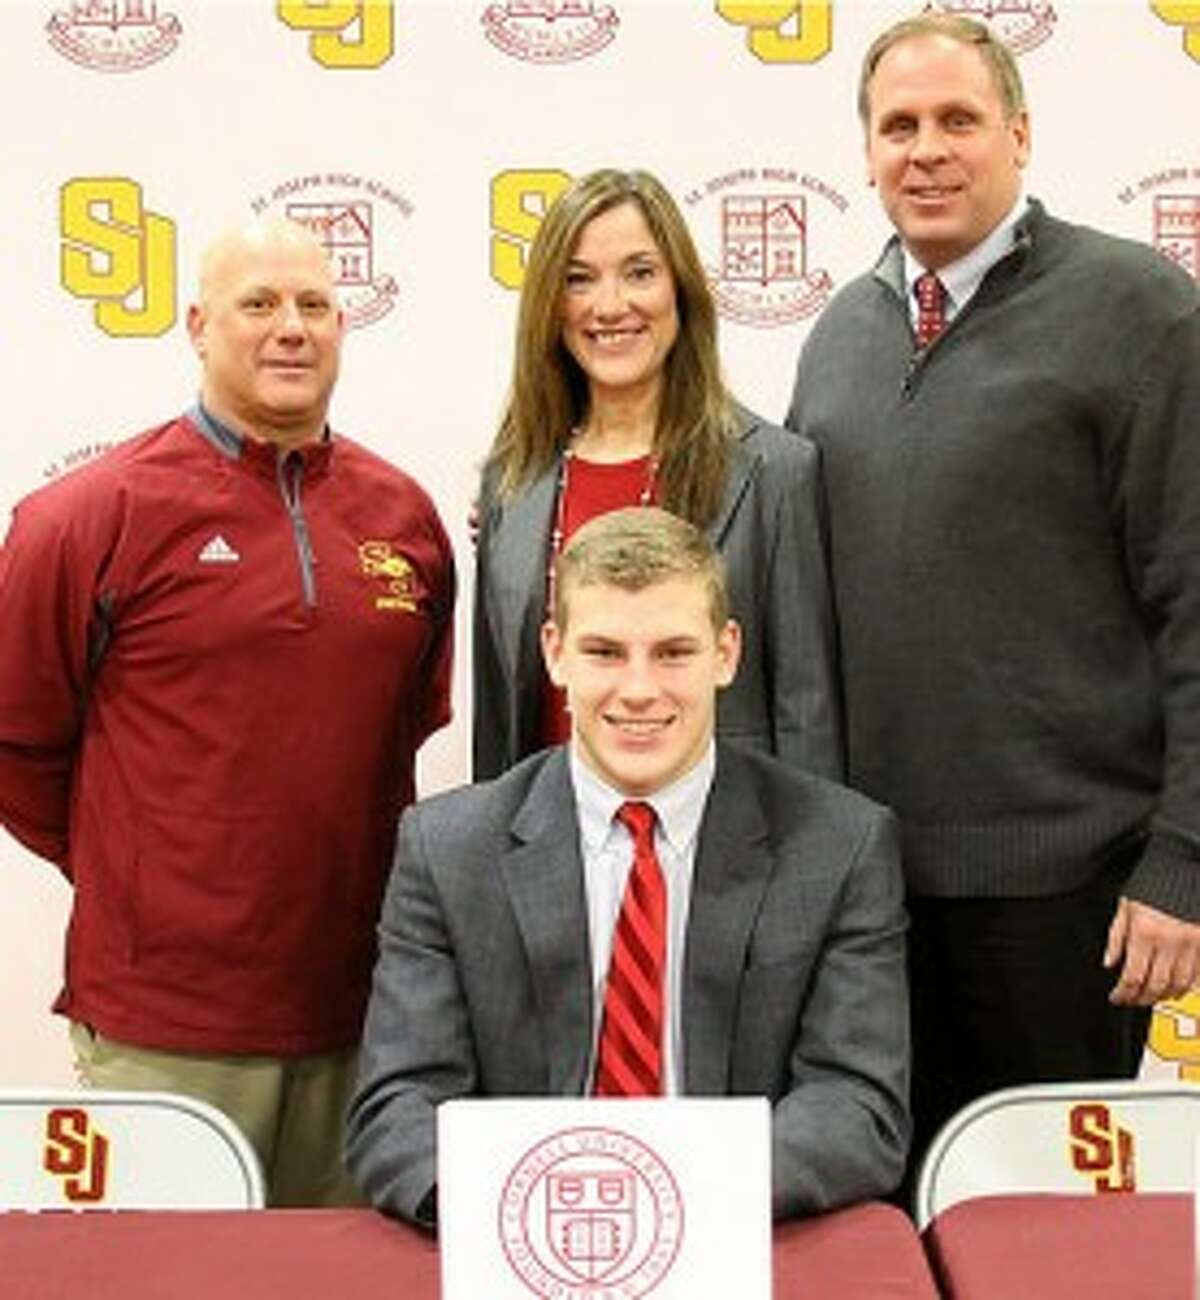 Cam Ryan has chosen to attend Cornell University. Pictured with the St. Joseph High football player are Cadets head coach Joe Della Vecchia, mom Elaine and dad Mike.